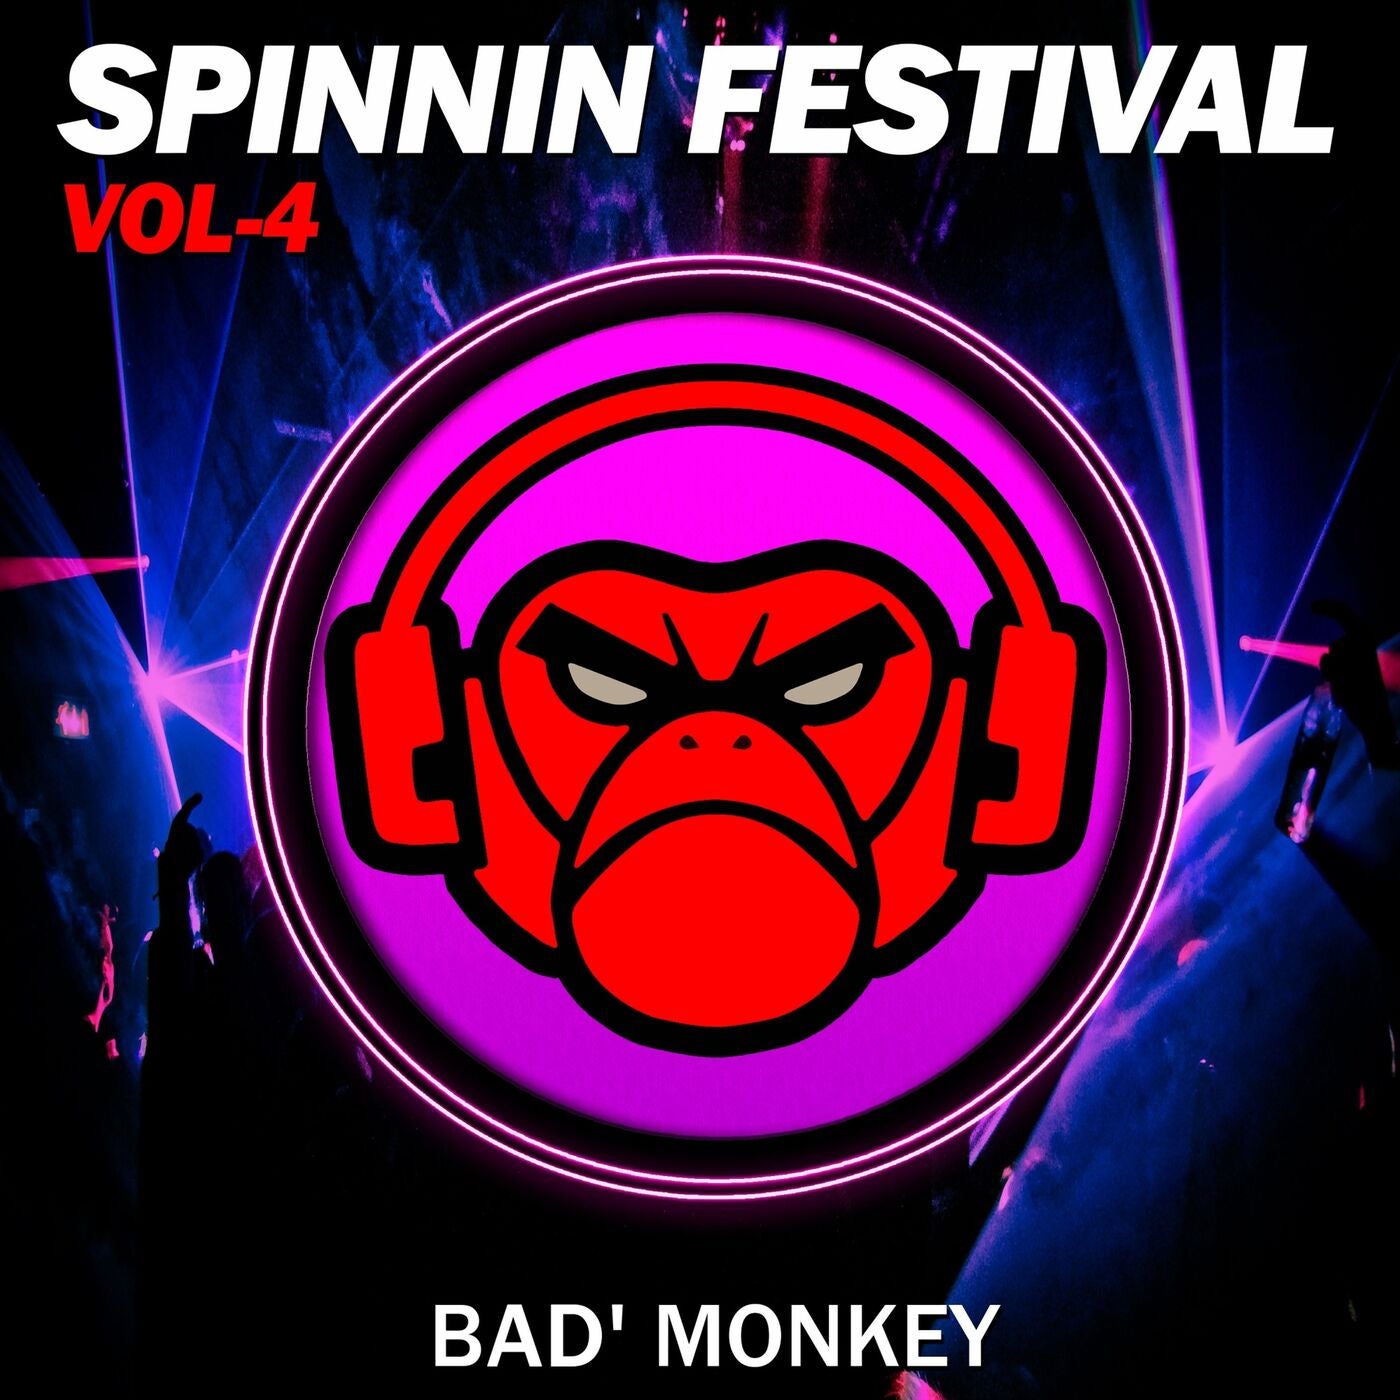 Spinnin Festival Vol. 4, compiled by Bad Monkey